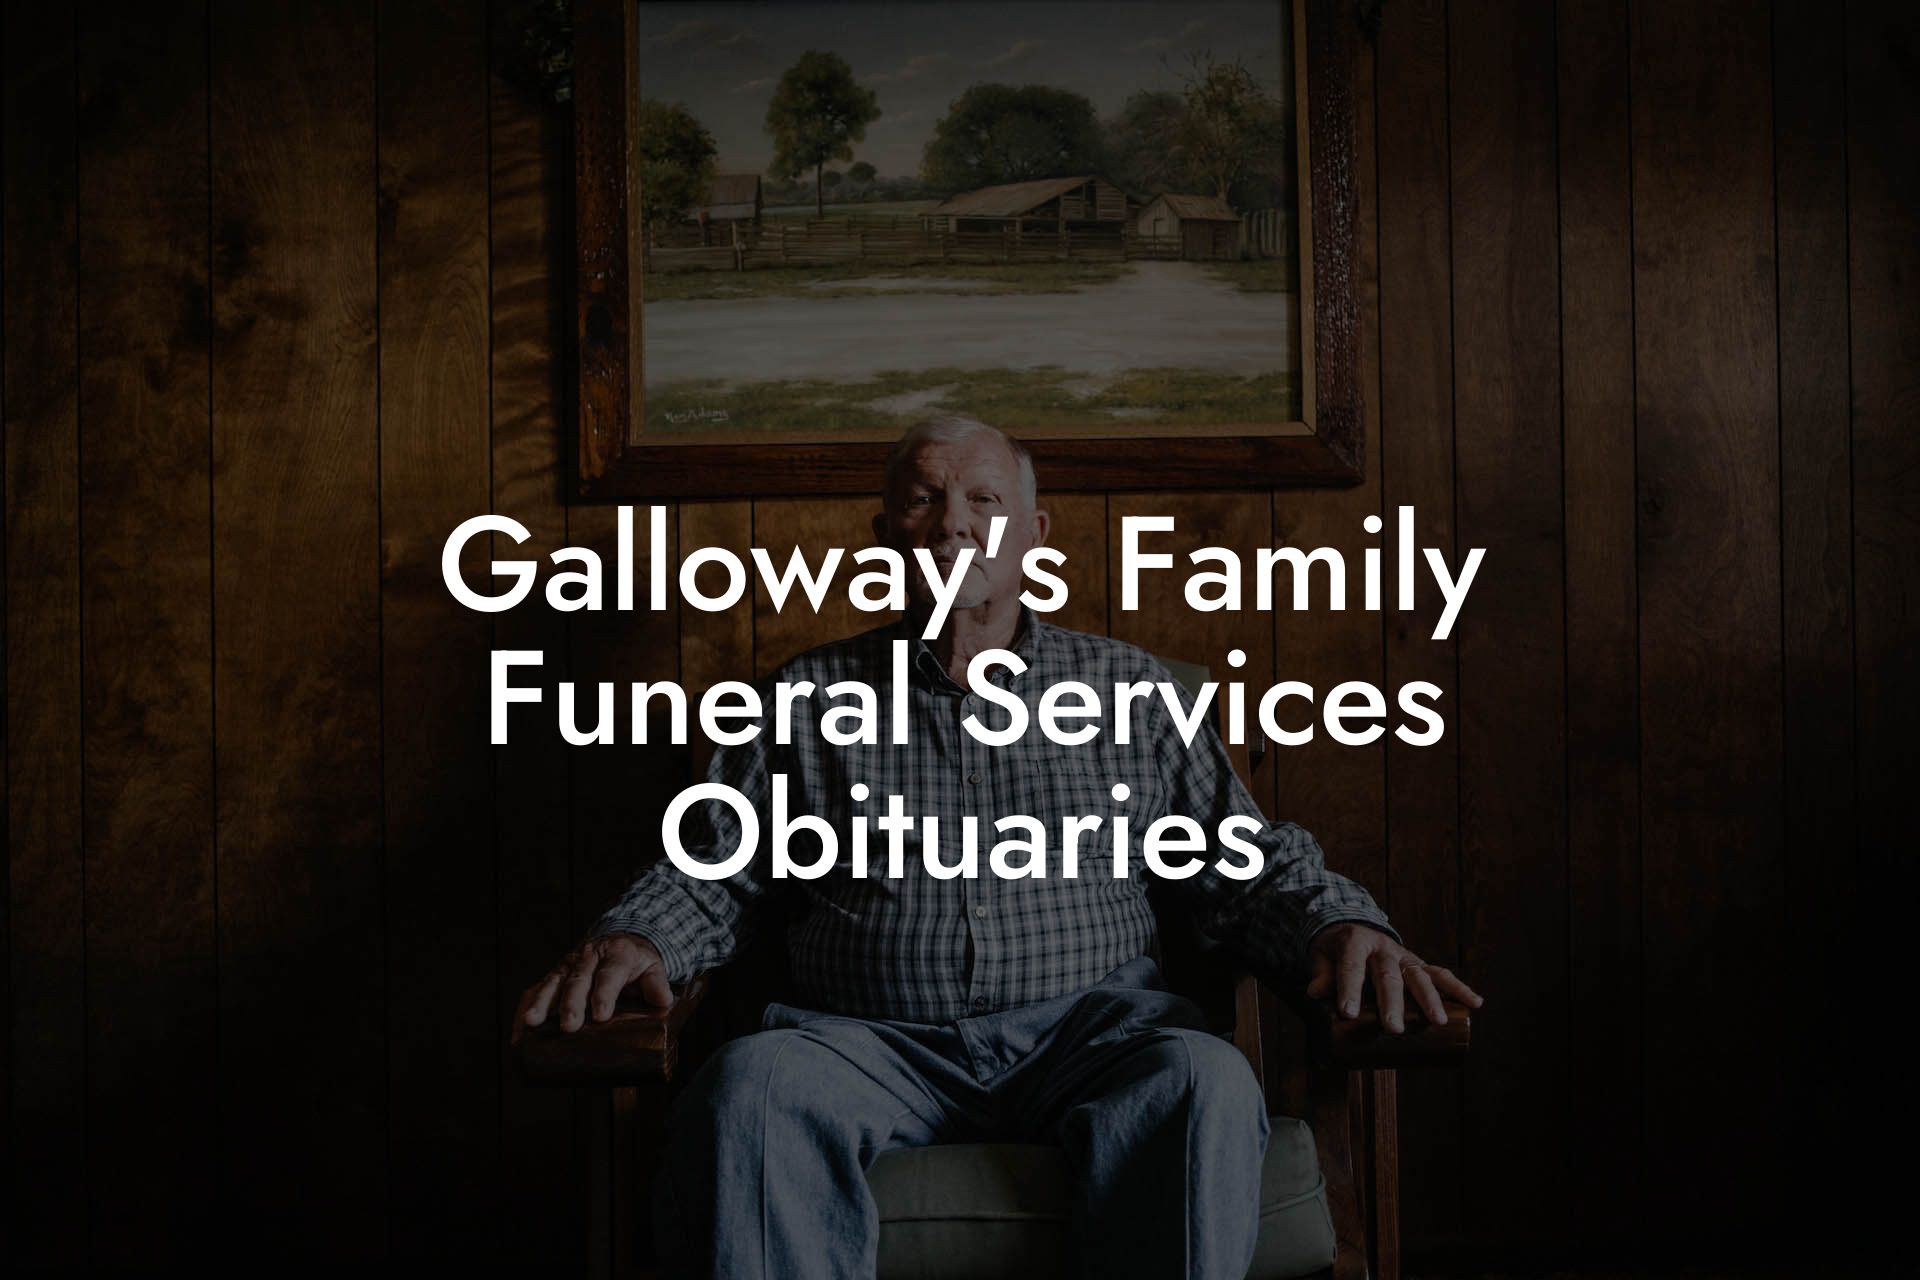 Galloway's Family Funeral Services Obituaries